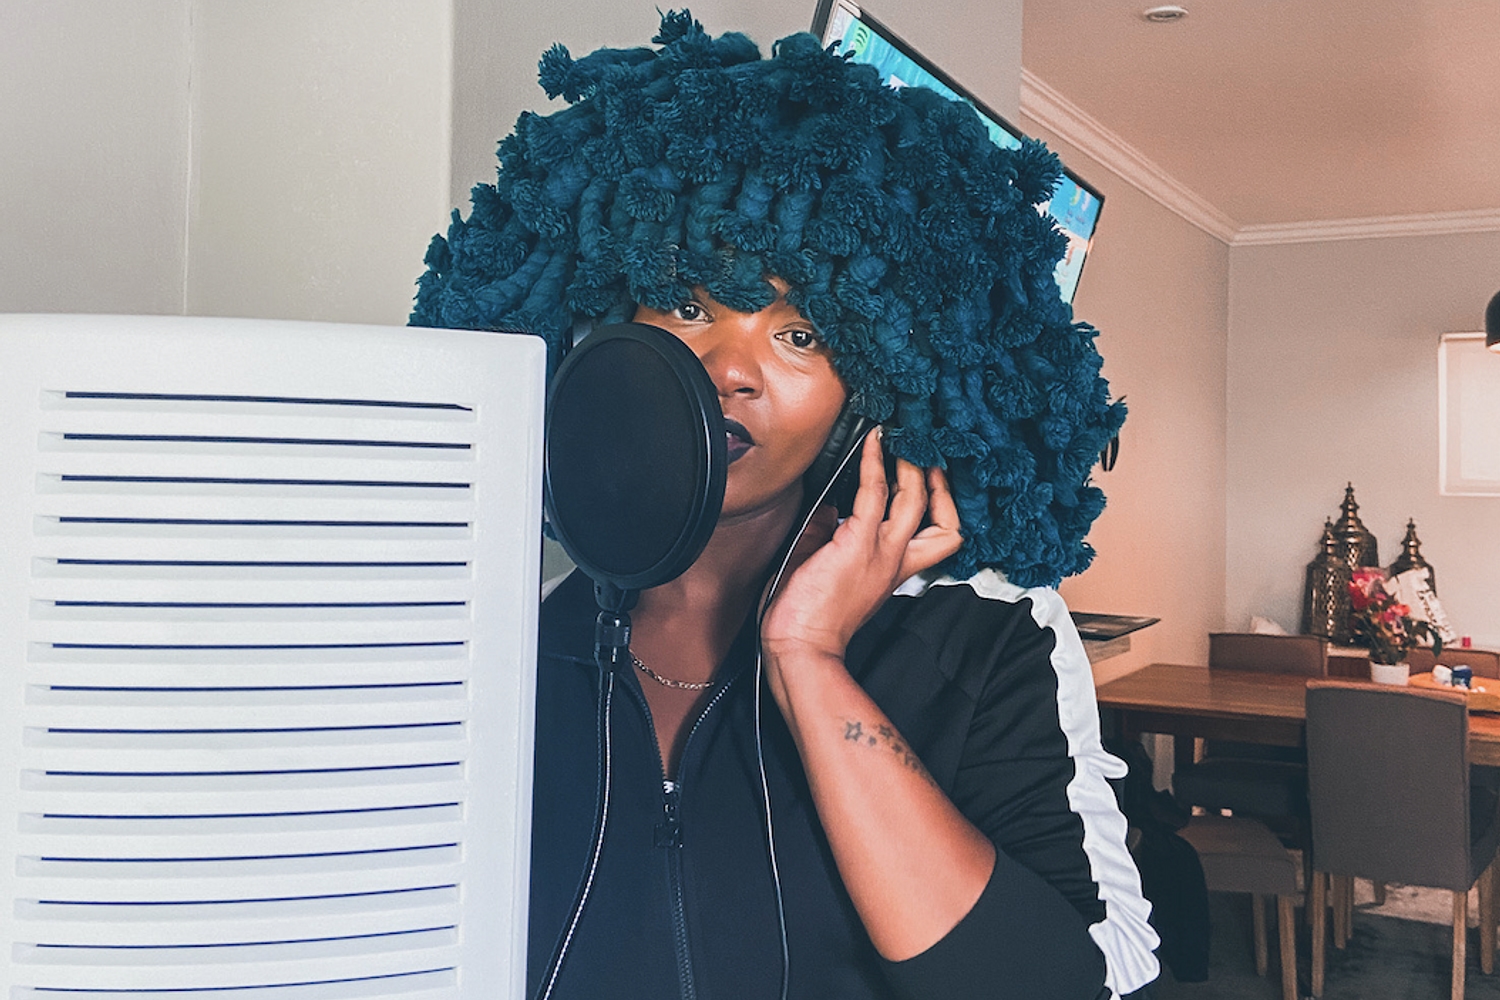 Moonchild Sanelly: "Now is my flex time and I’m going for EVERYTHING"